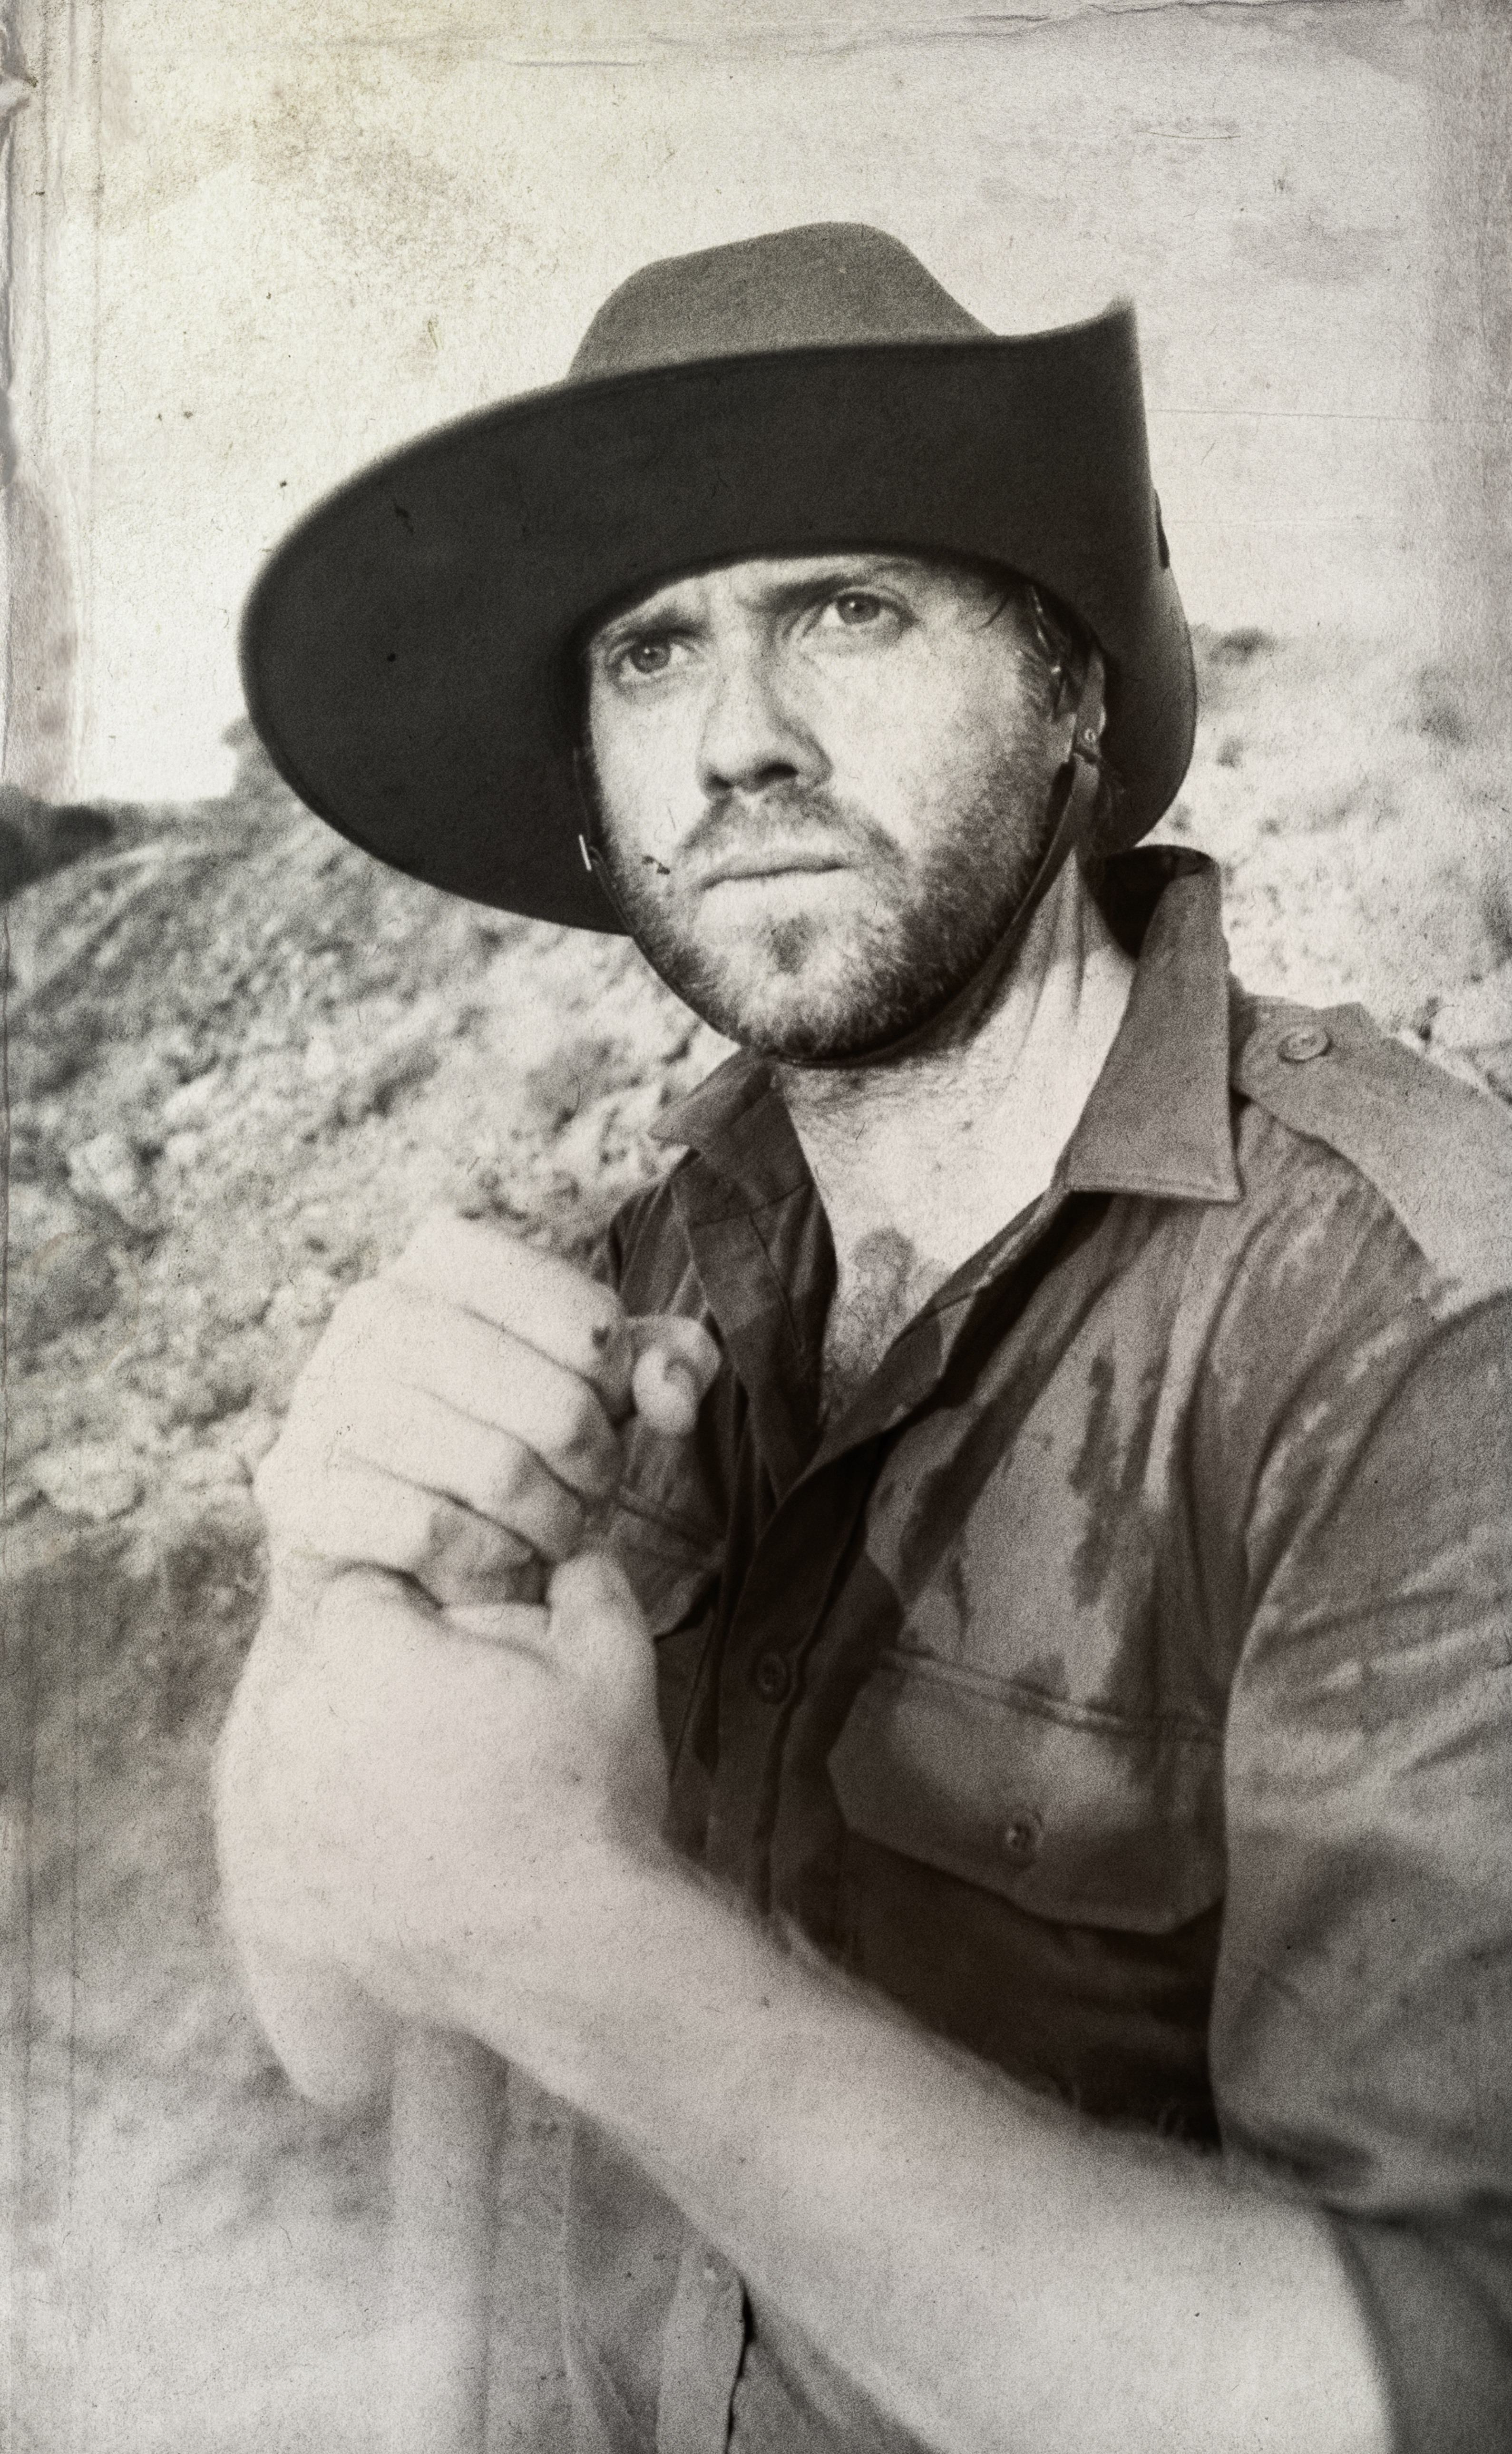 Boot camp - The Water Diviner Christopher Sommers as Sgt Tucker